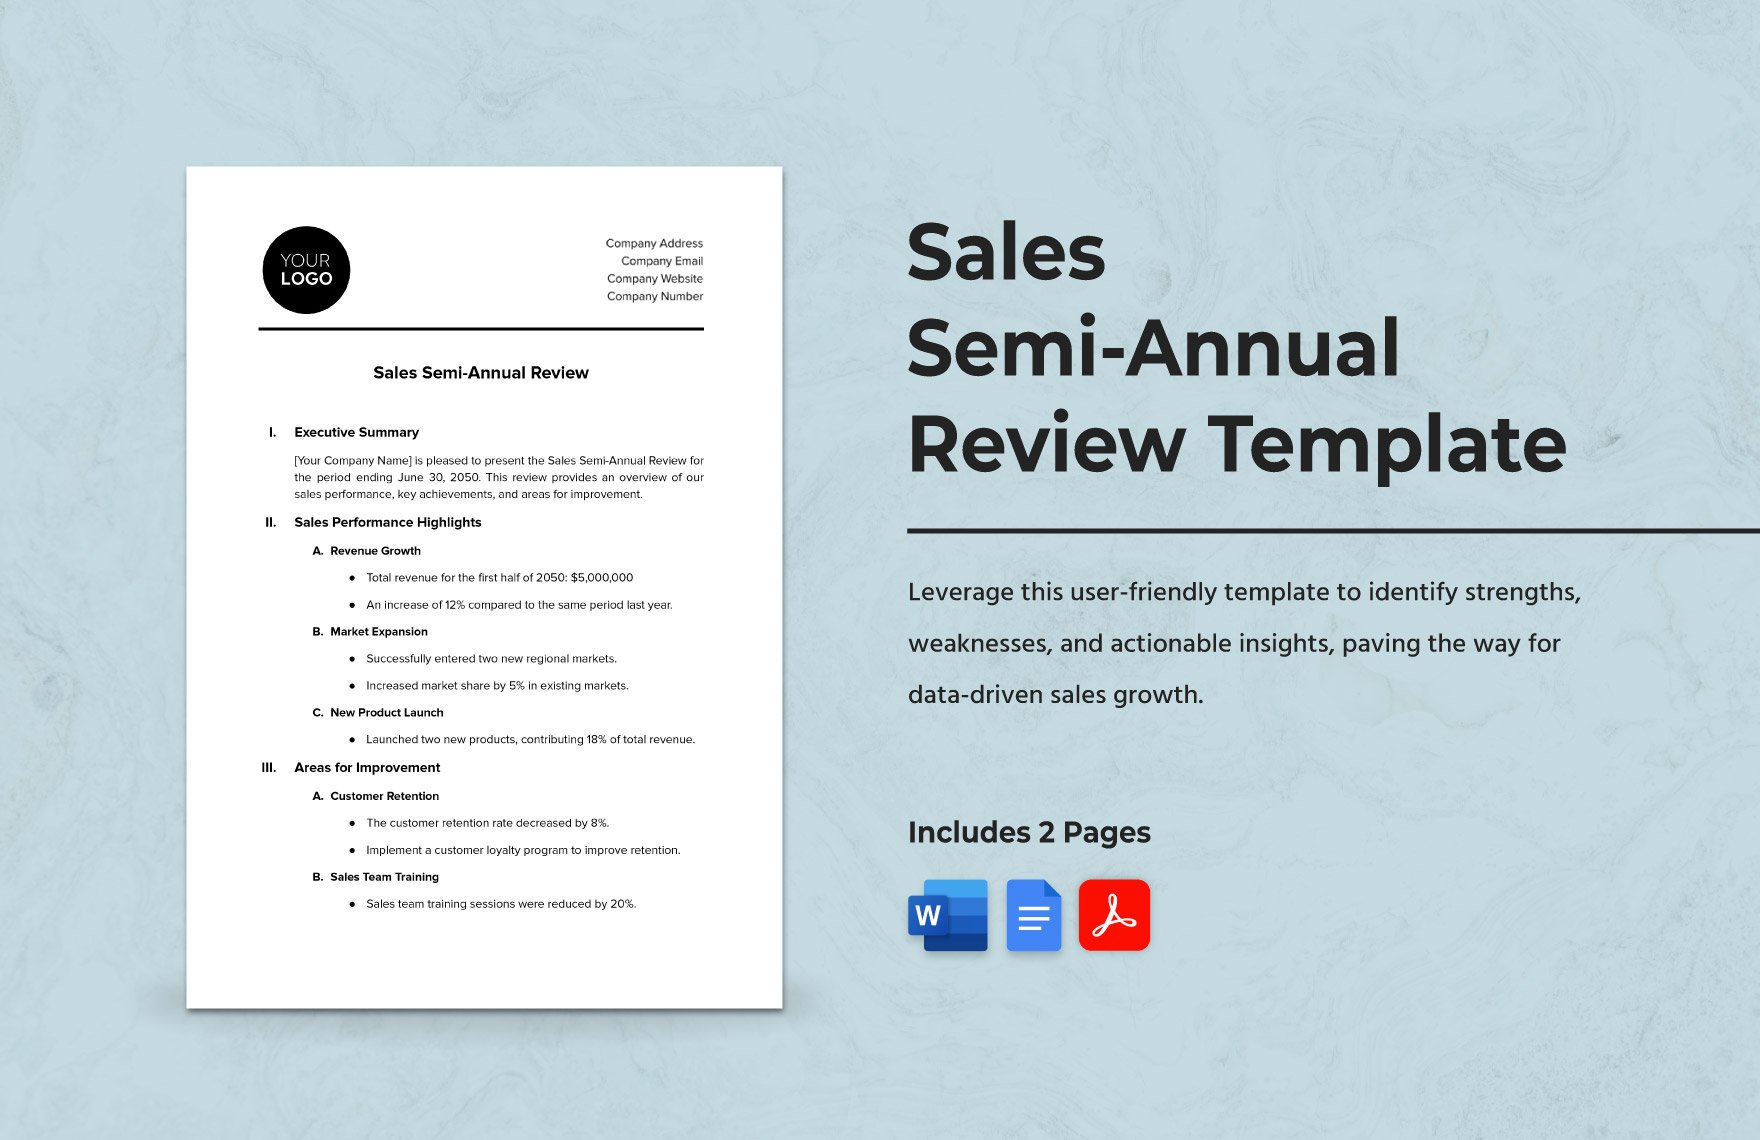 Sales Semi-Annual Review Template in Word, Google Docs, PDF